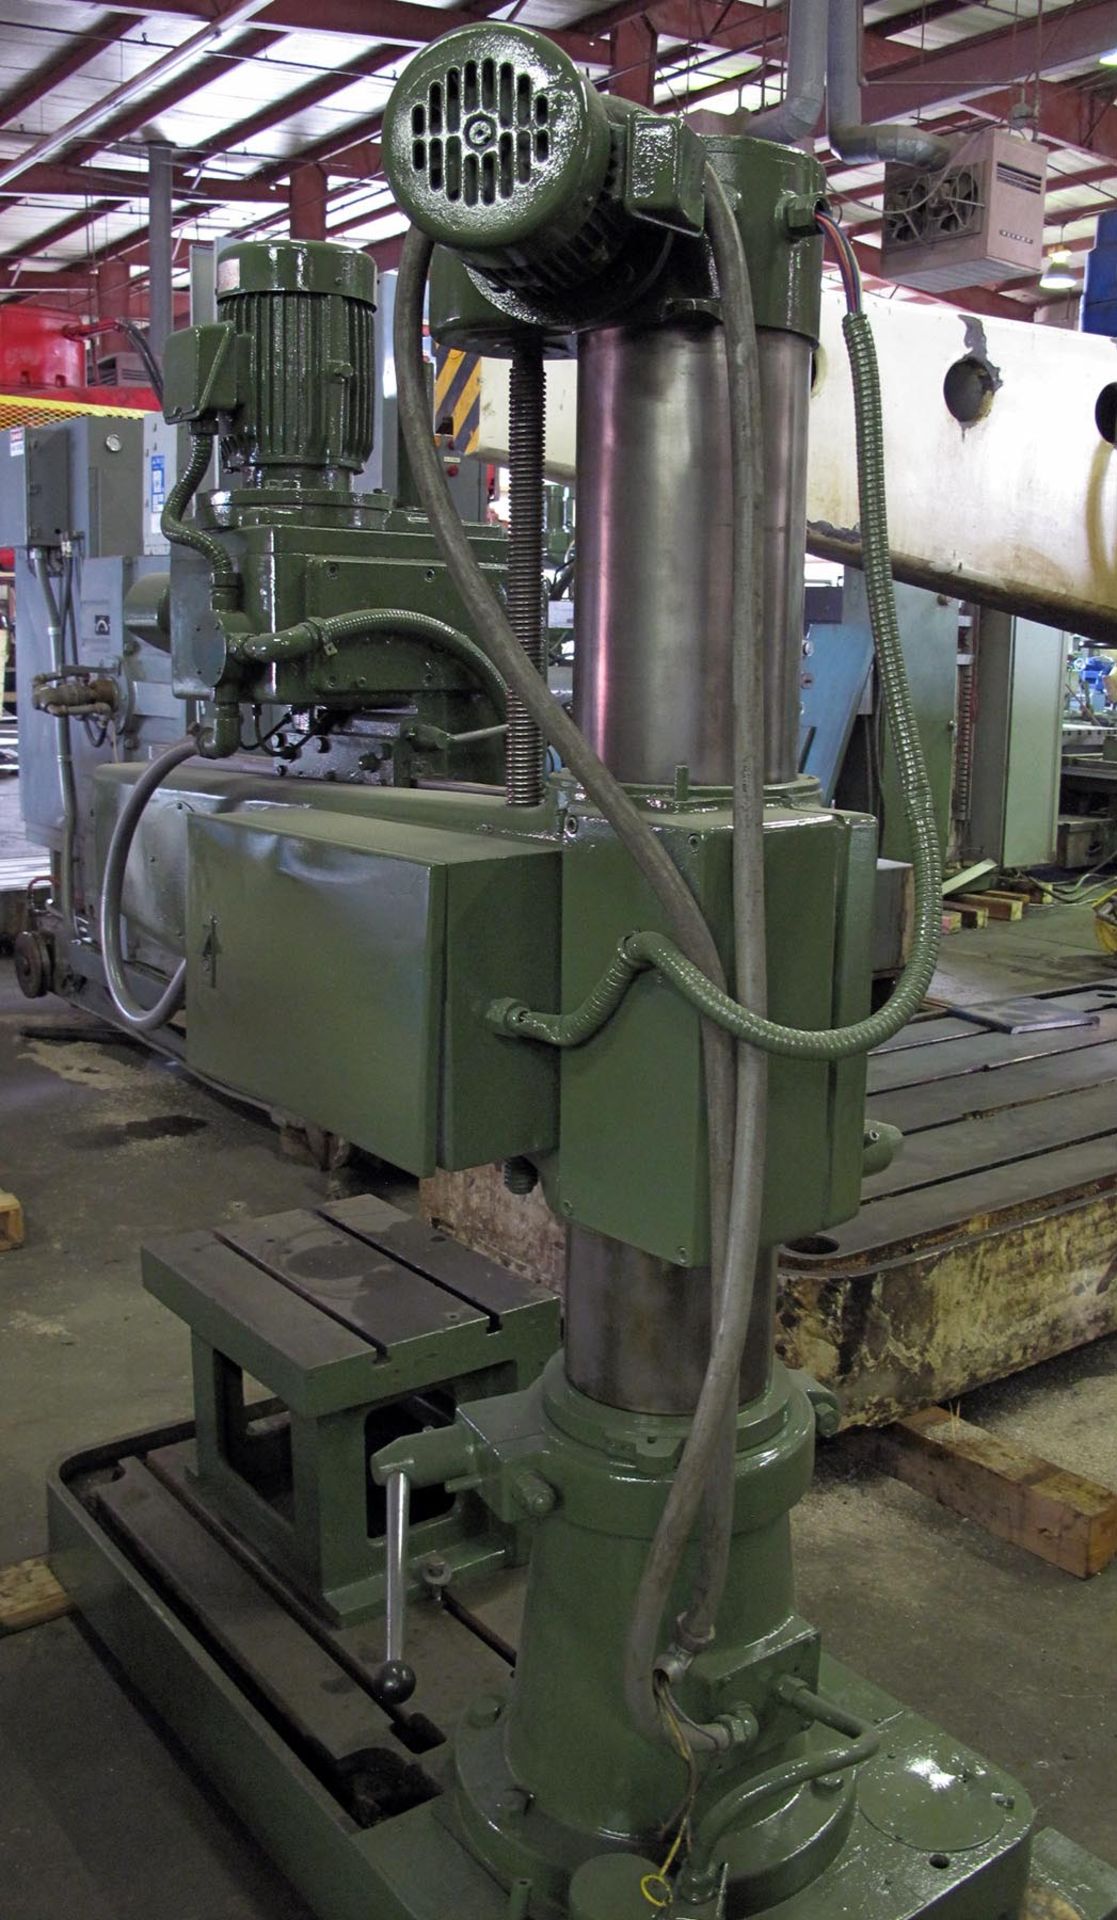 RADIAL DRILL, OOYA 3' X 9", Mdl. YMR-915, drills to center of 72"circle, 9"dia. column, 23.39"arm - Image 7 of 7